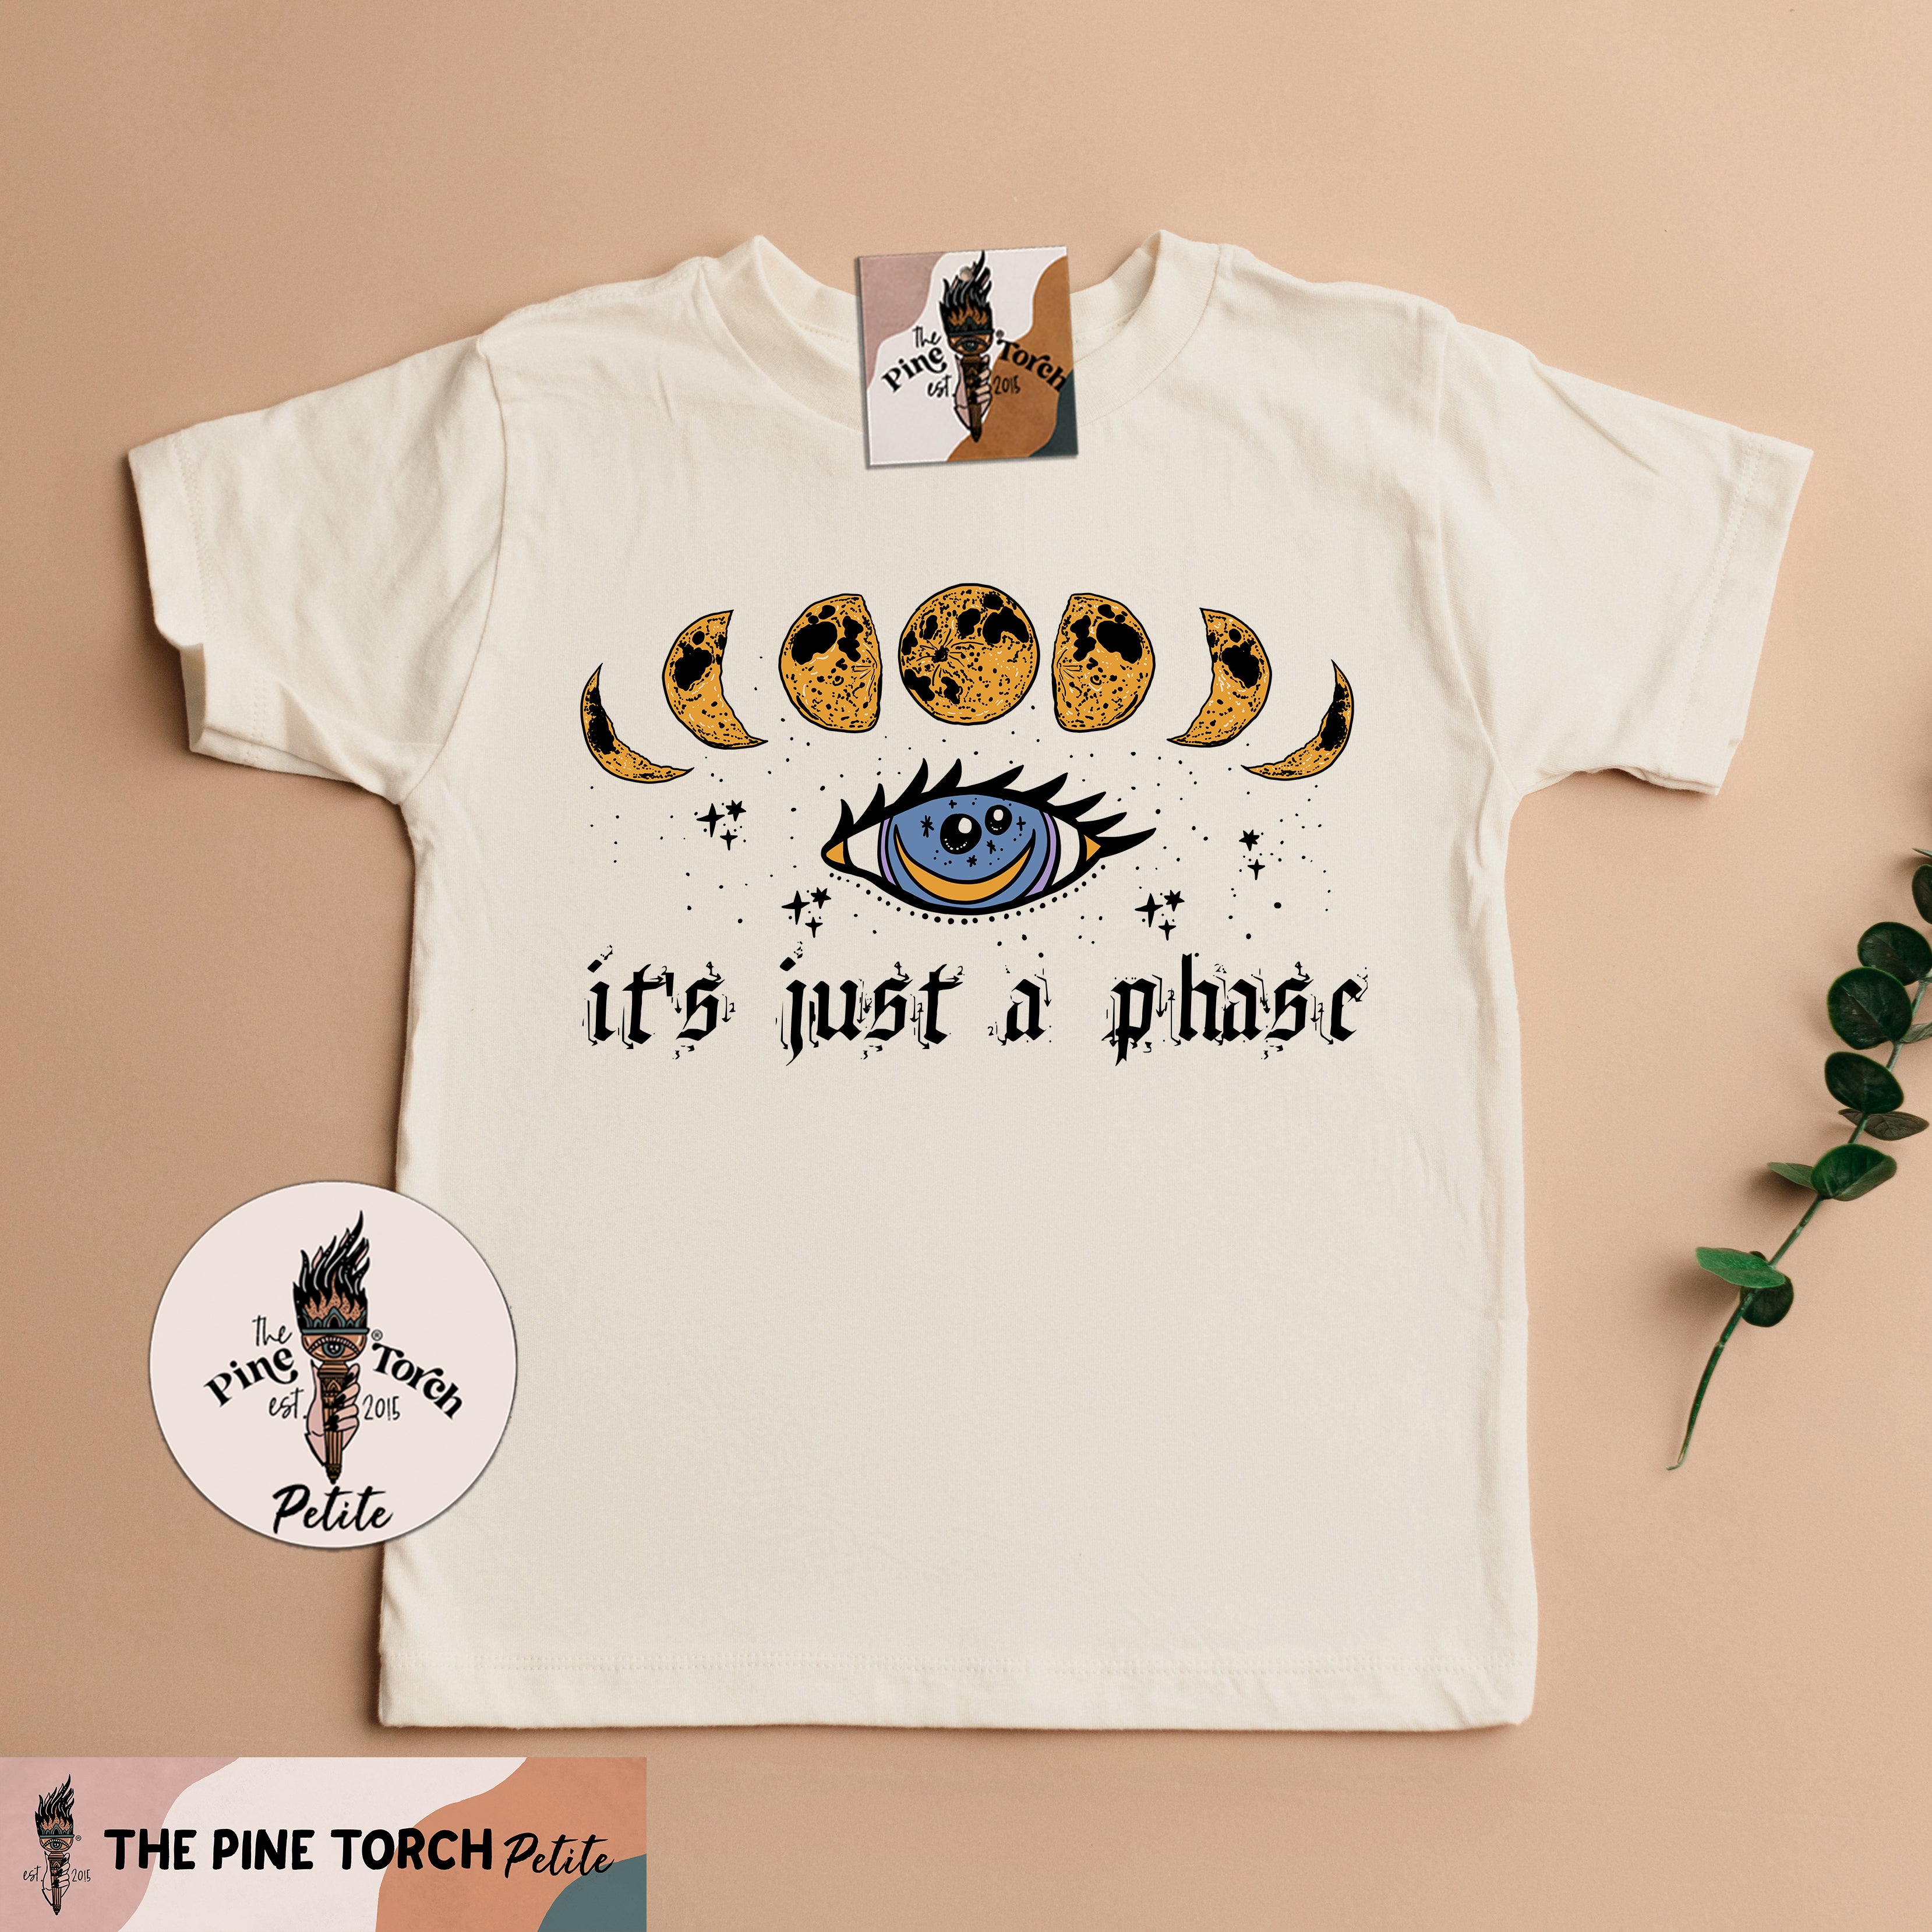 « JUST A PHASE » KIDS TEE